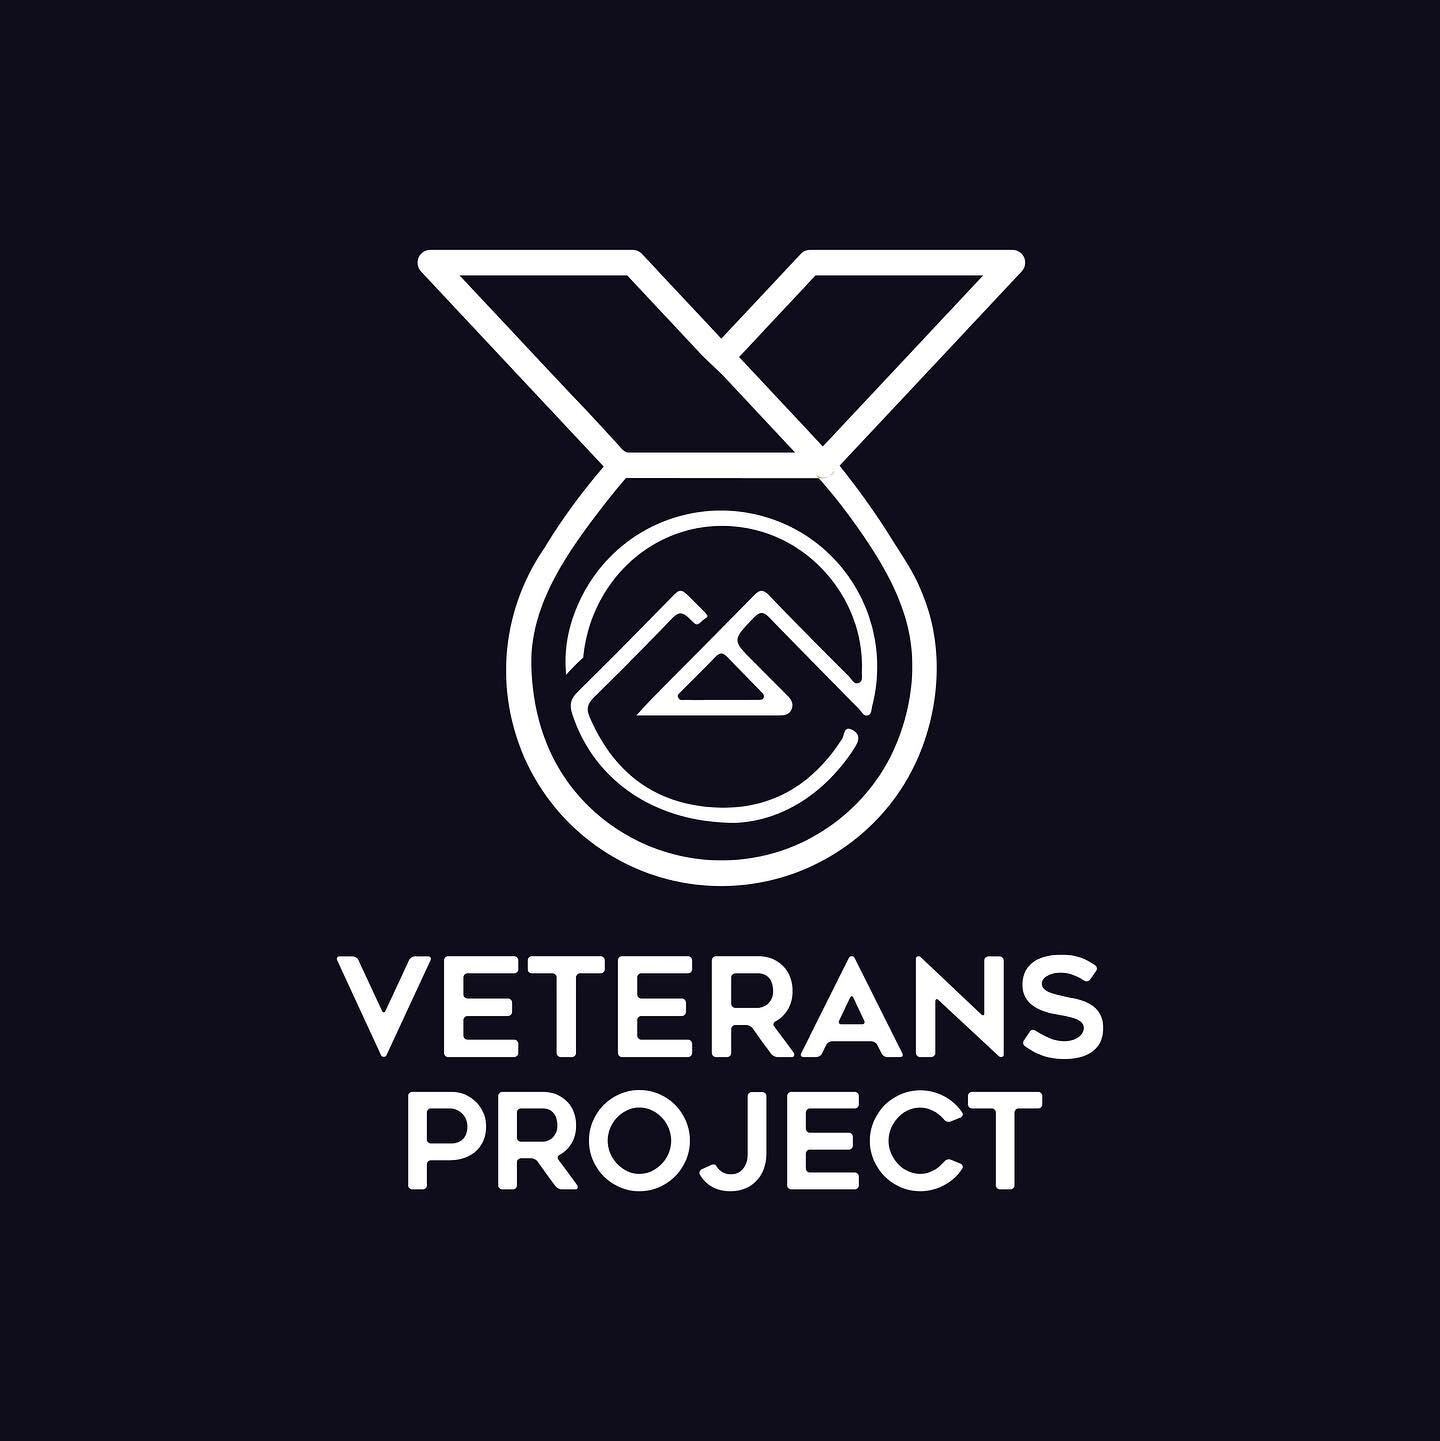 Branding and packaging for the Veterans Project, a CBD brand donated to veterans